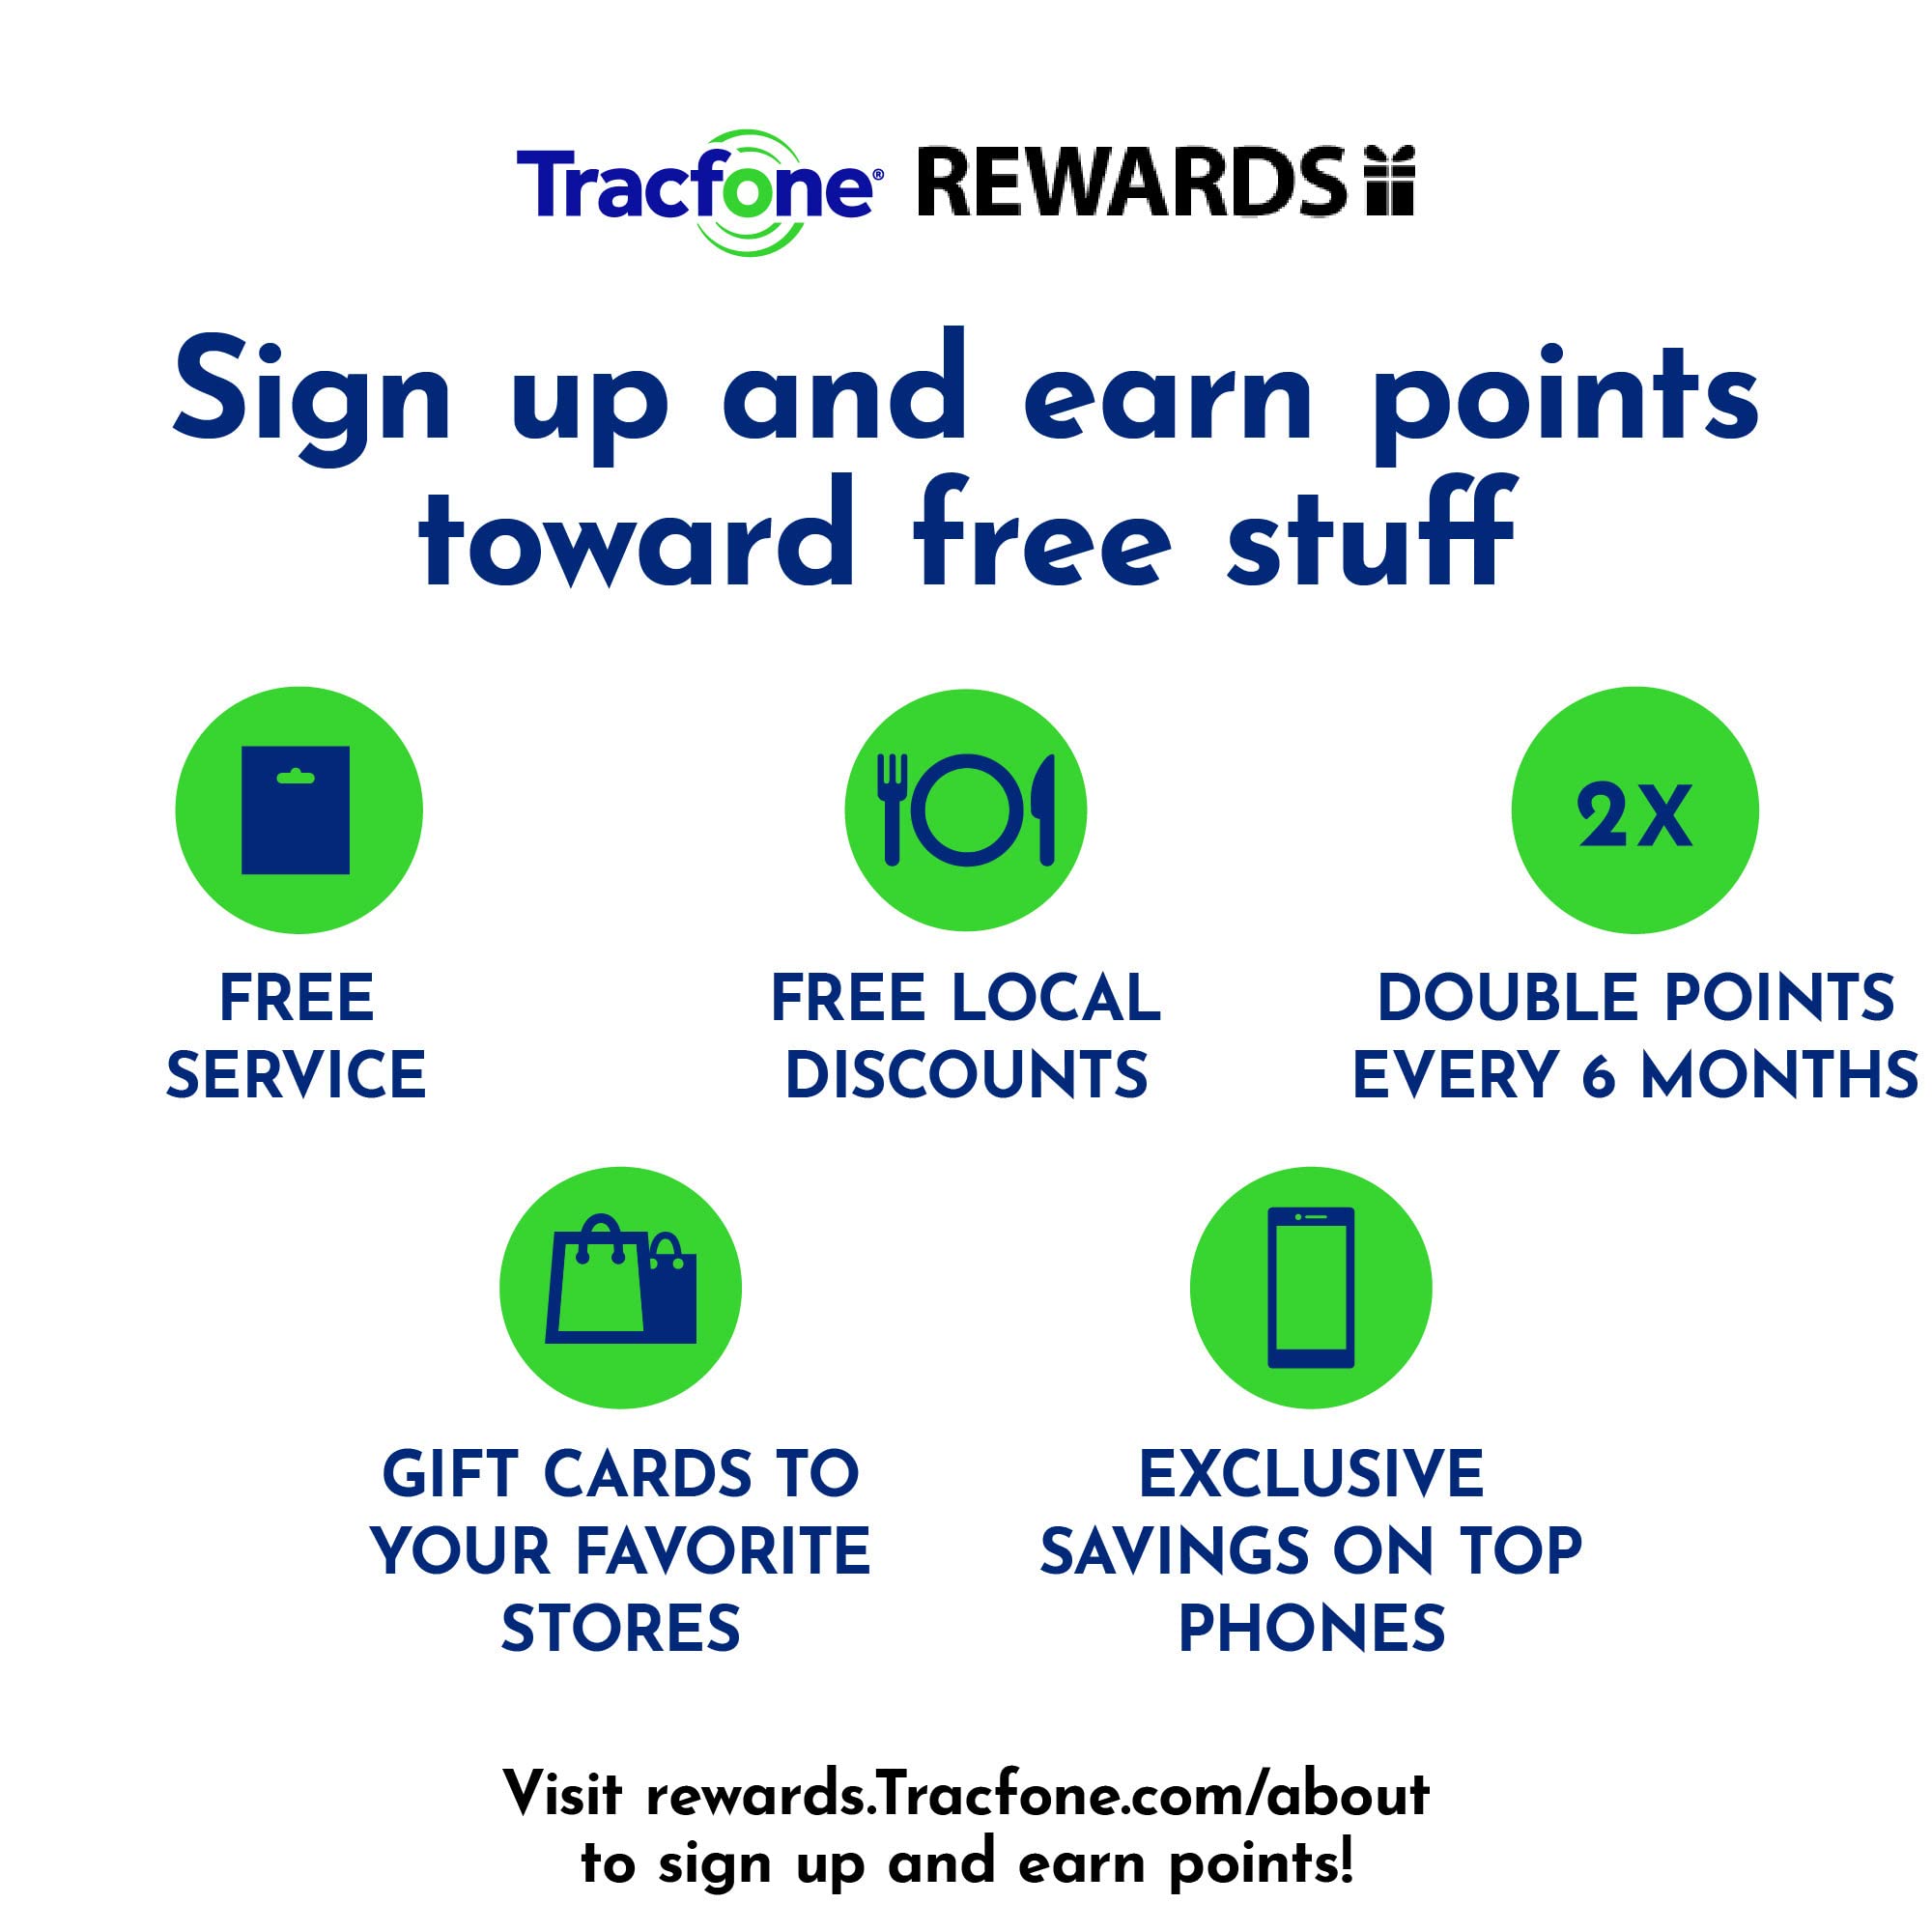 TracFone $10 Data Add–On Card 1GB [Physical Delivery]